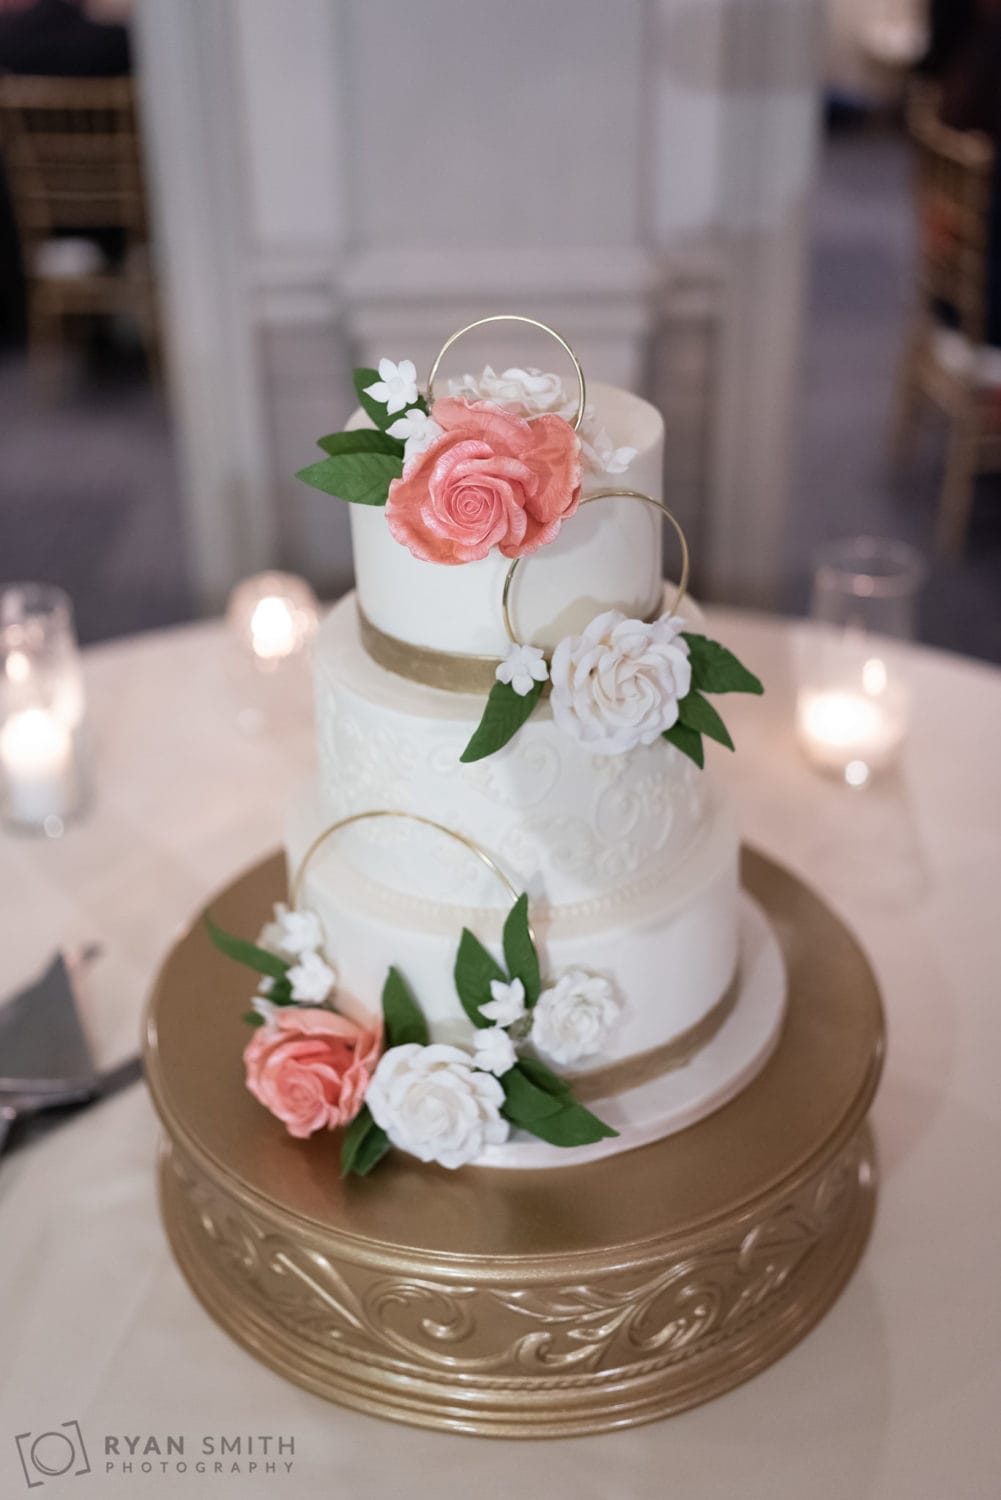 Cake picture - Litchfield Country Club